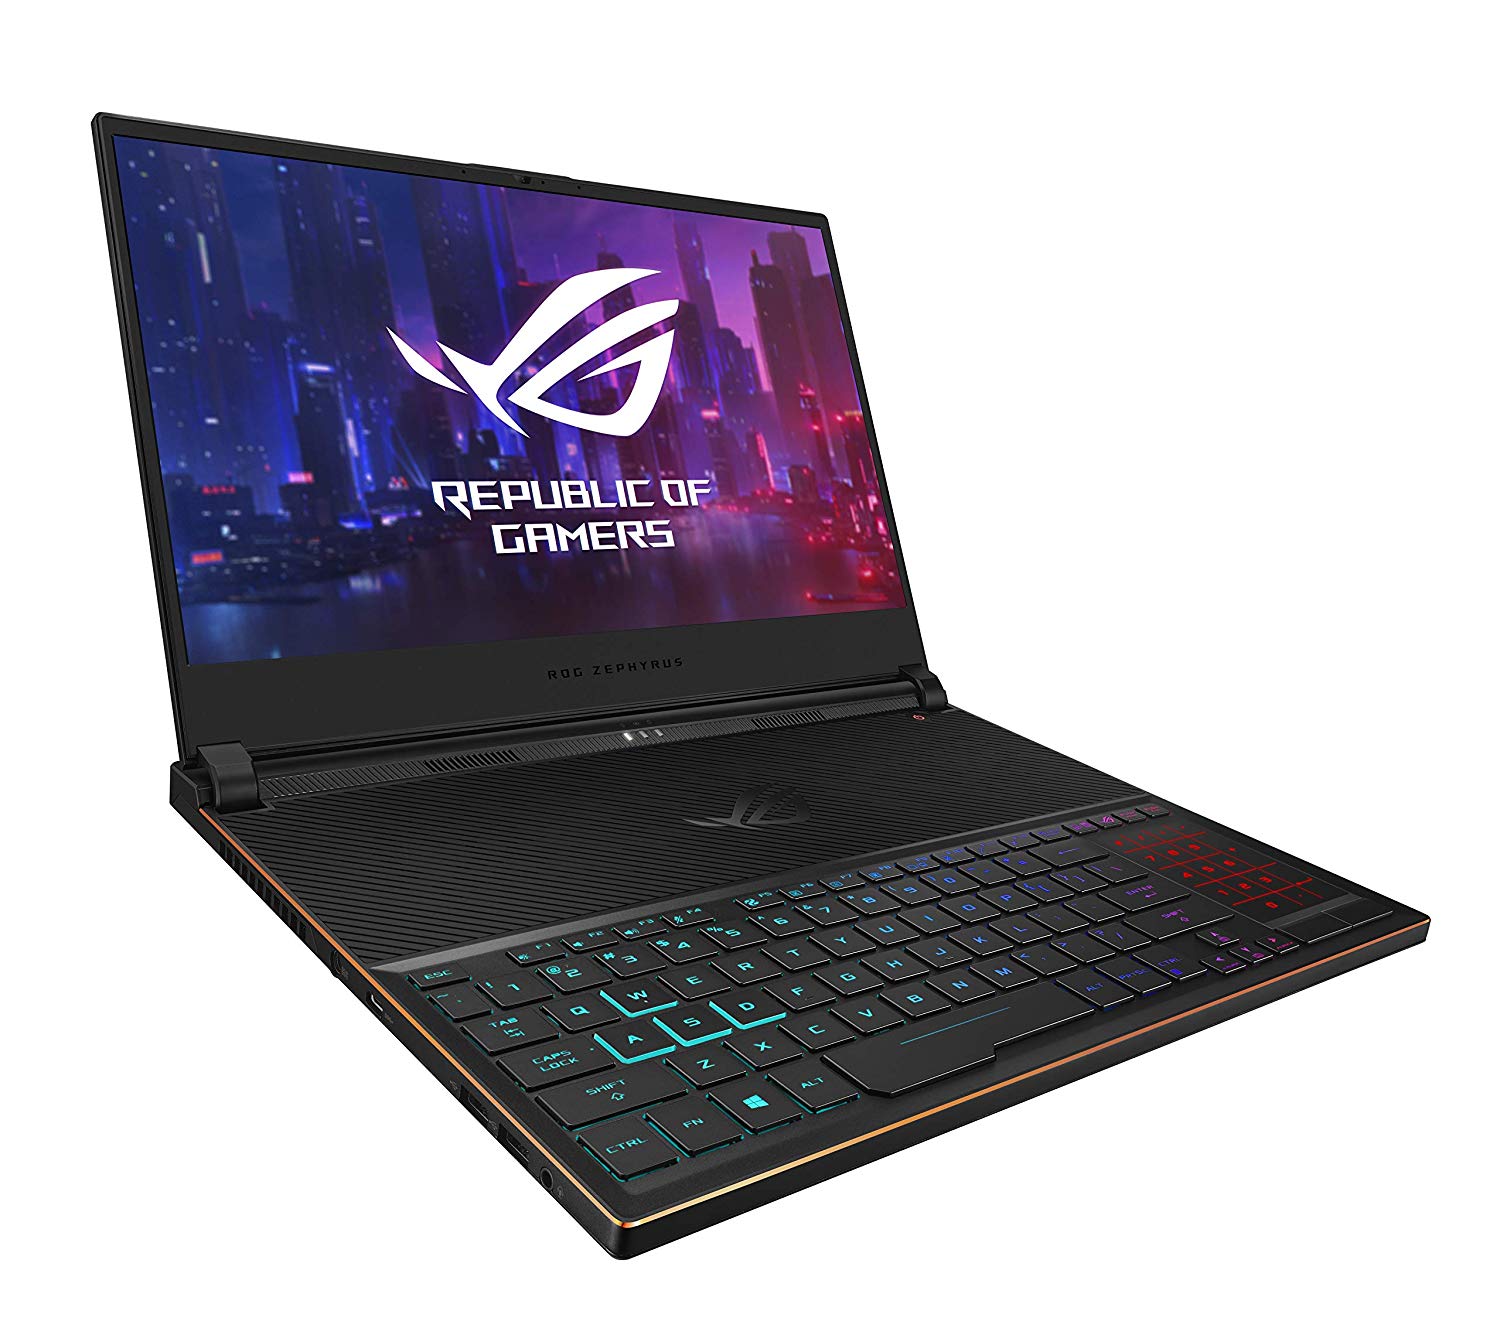 ASUS launches new gaming laptops 2019